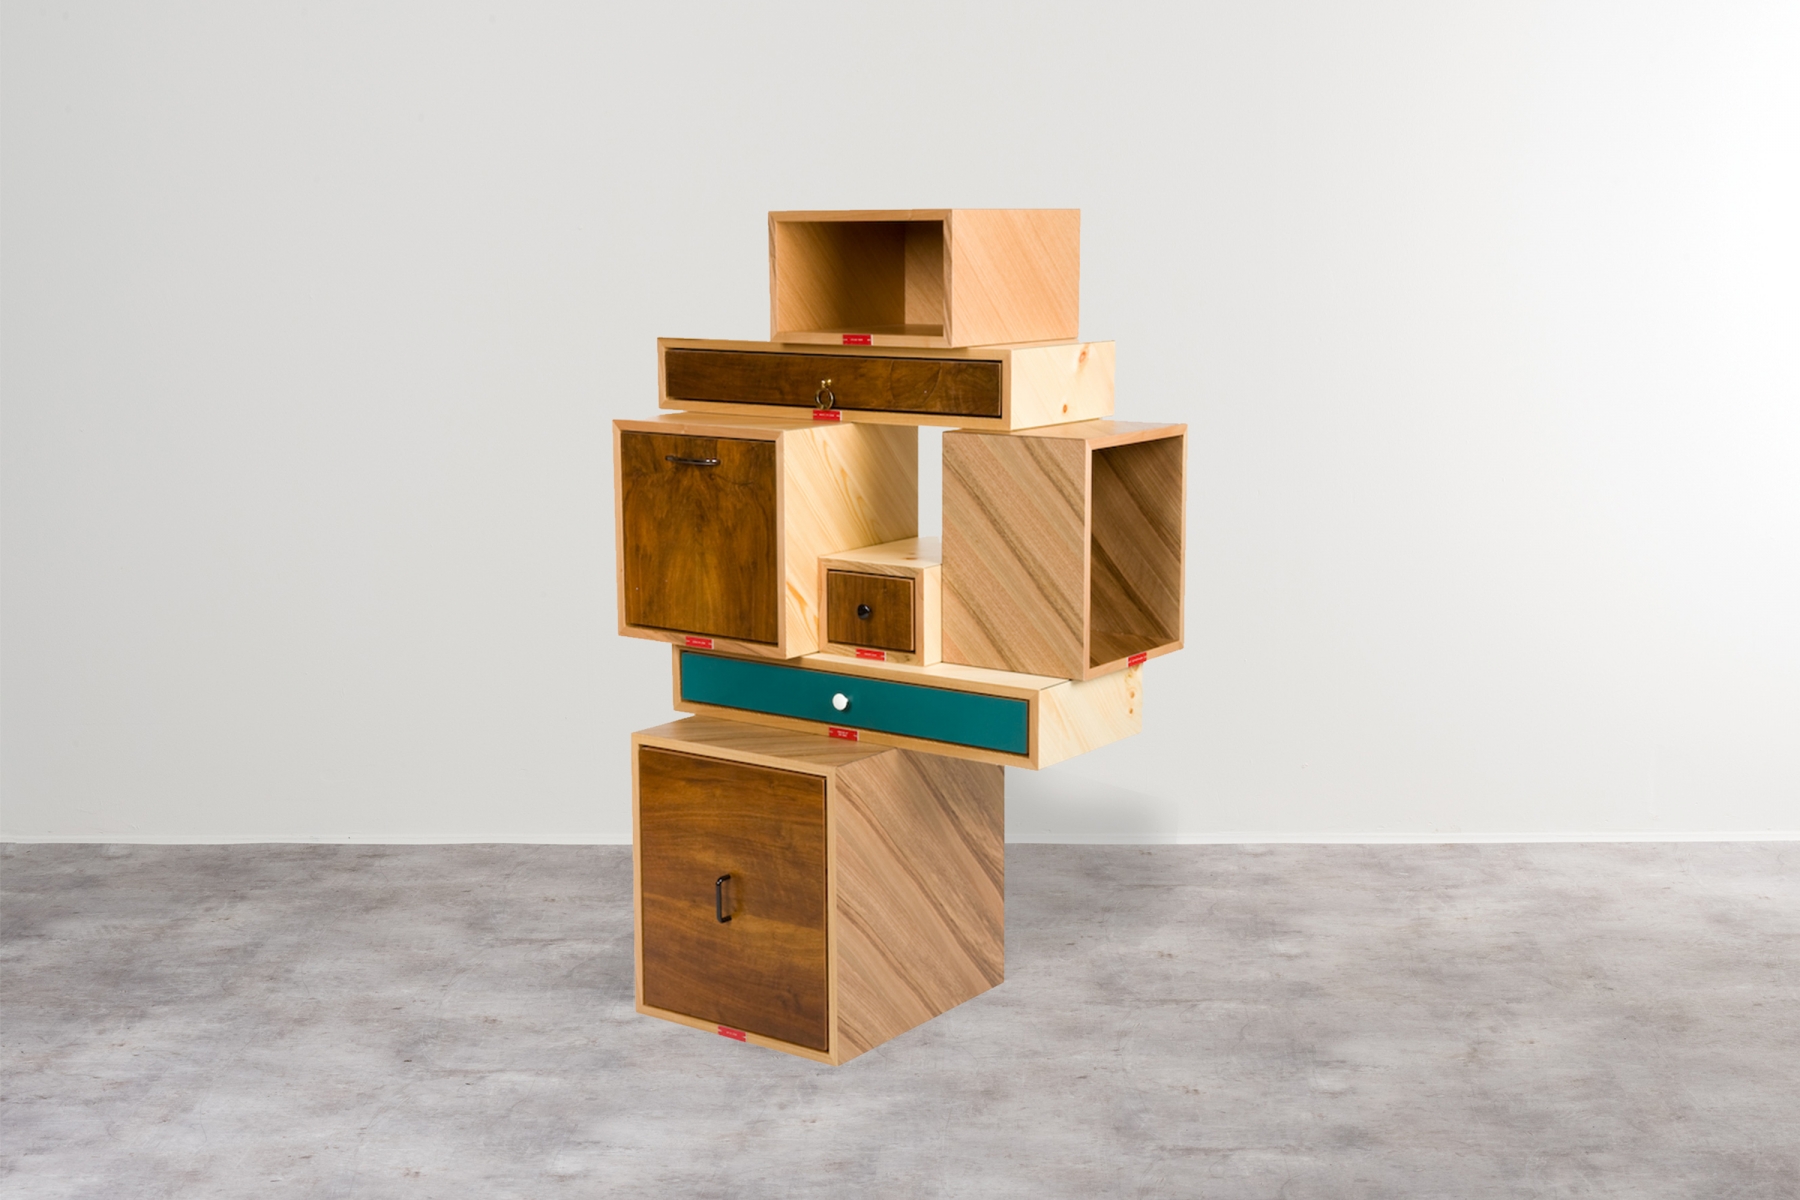 Mobile contenitore 'Somerset House/Box drawers 01' Martino Gamper pic-1